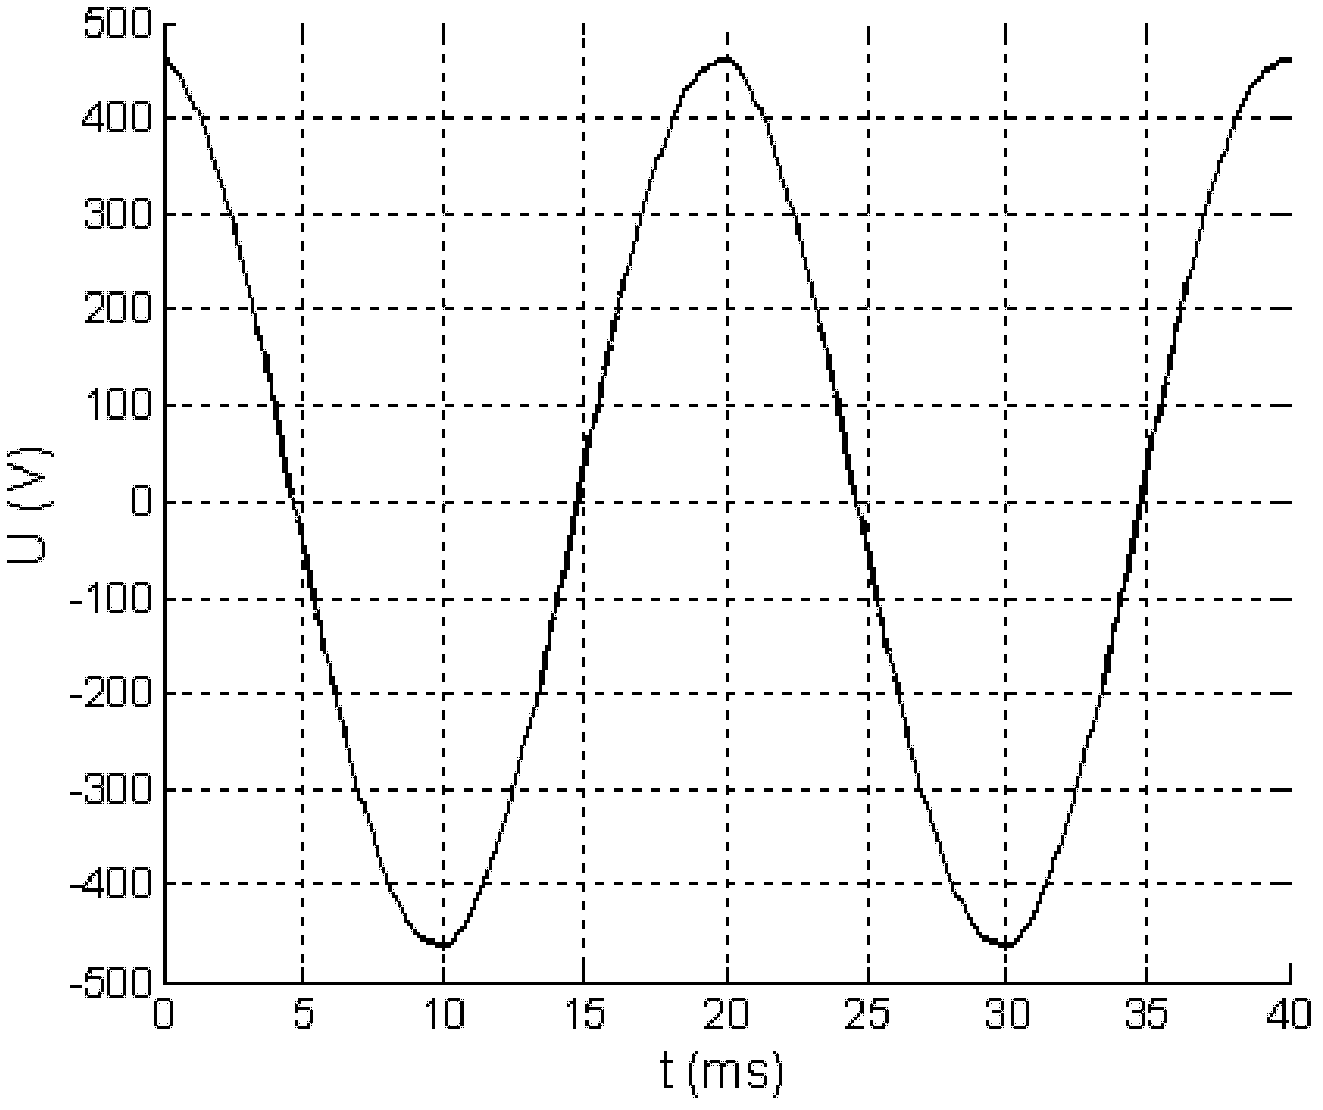 Acquiring method of DC (direct-current) bias magnet ratio total losses curve of transformer core material